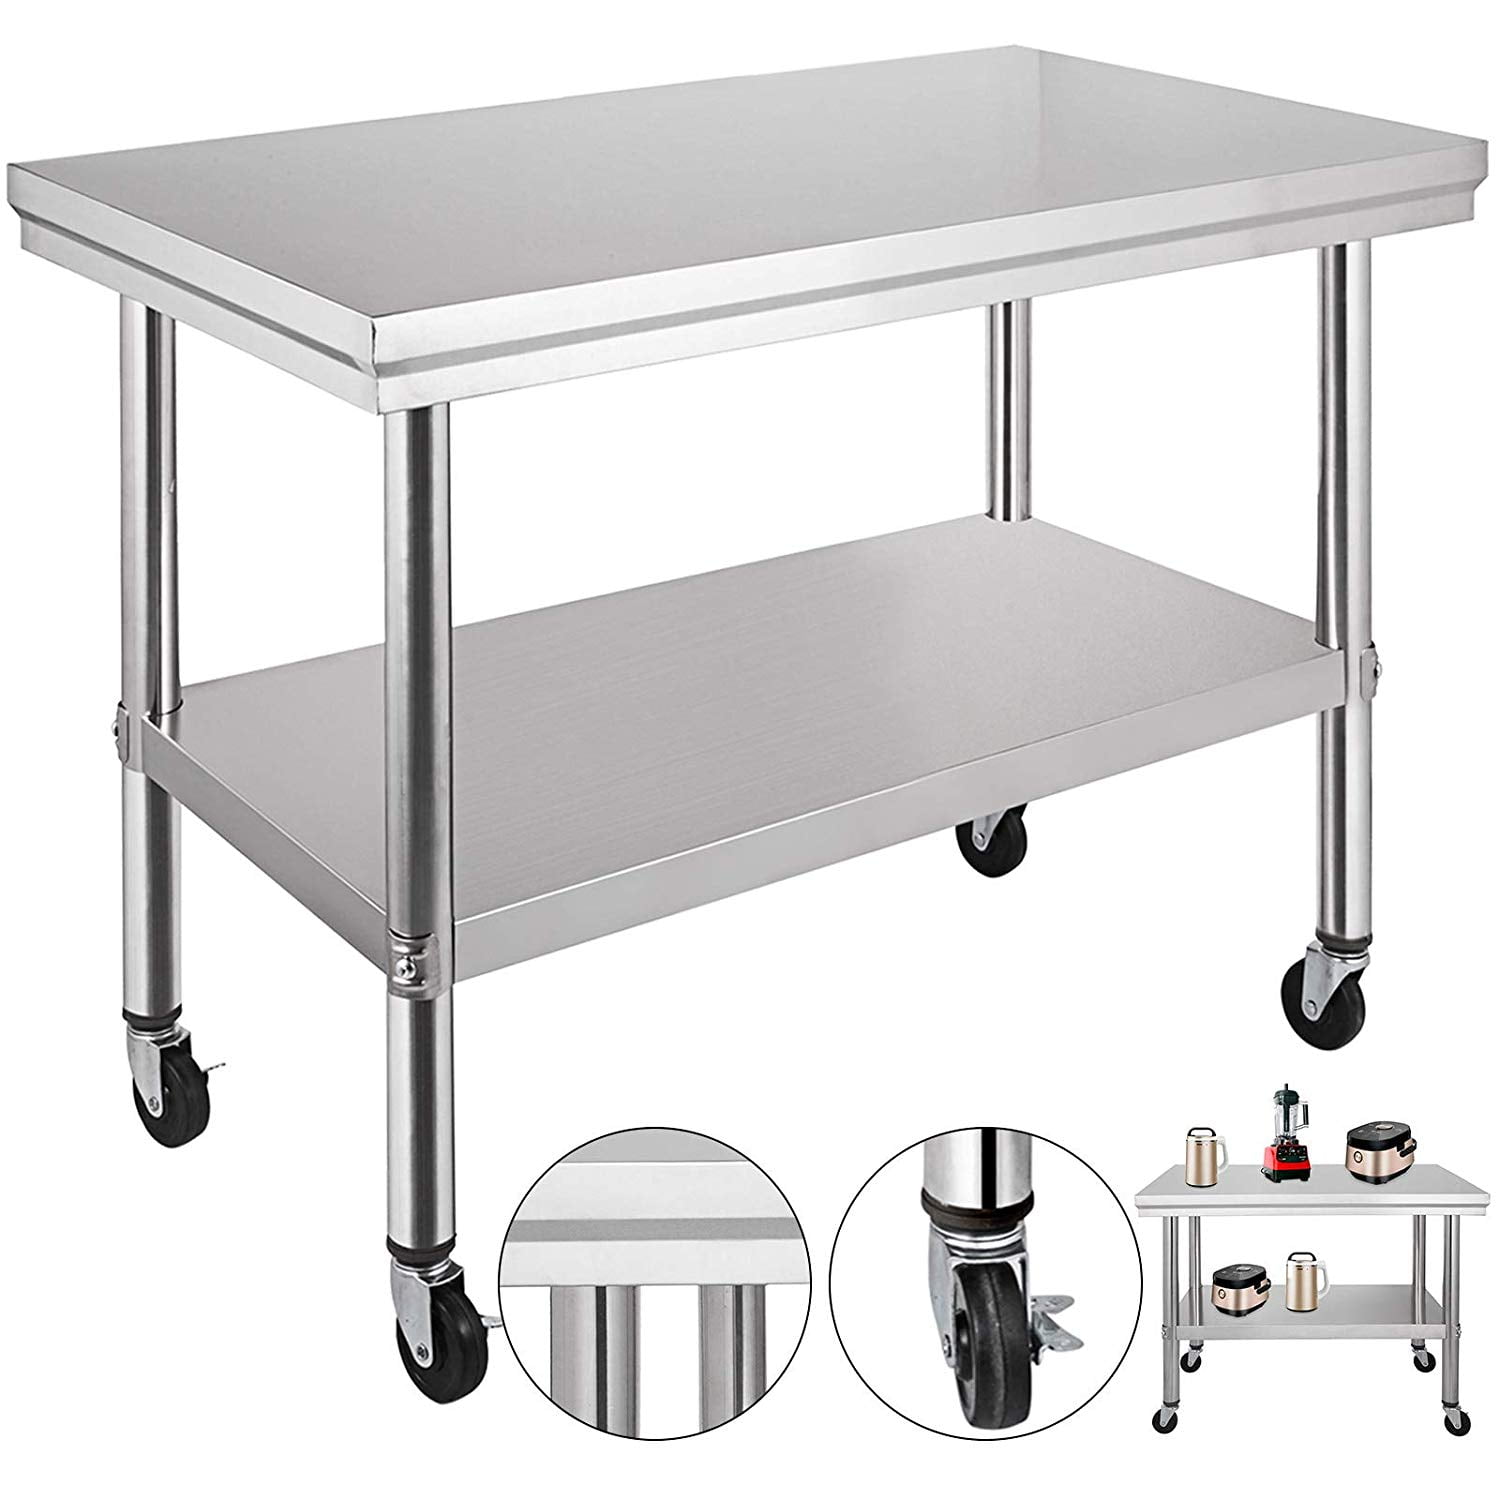 24 x 30 x 32 Inch Stainless Steel Work Table with casters Heavy Duty Stainless Steel Work Table On Wheels